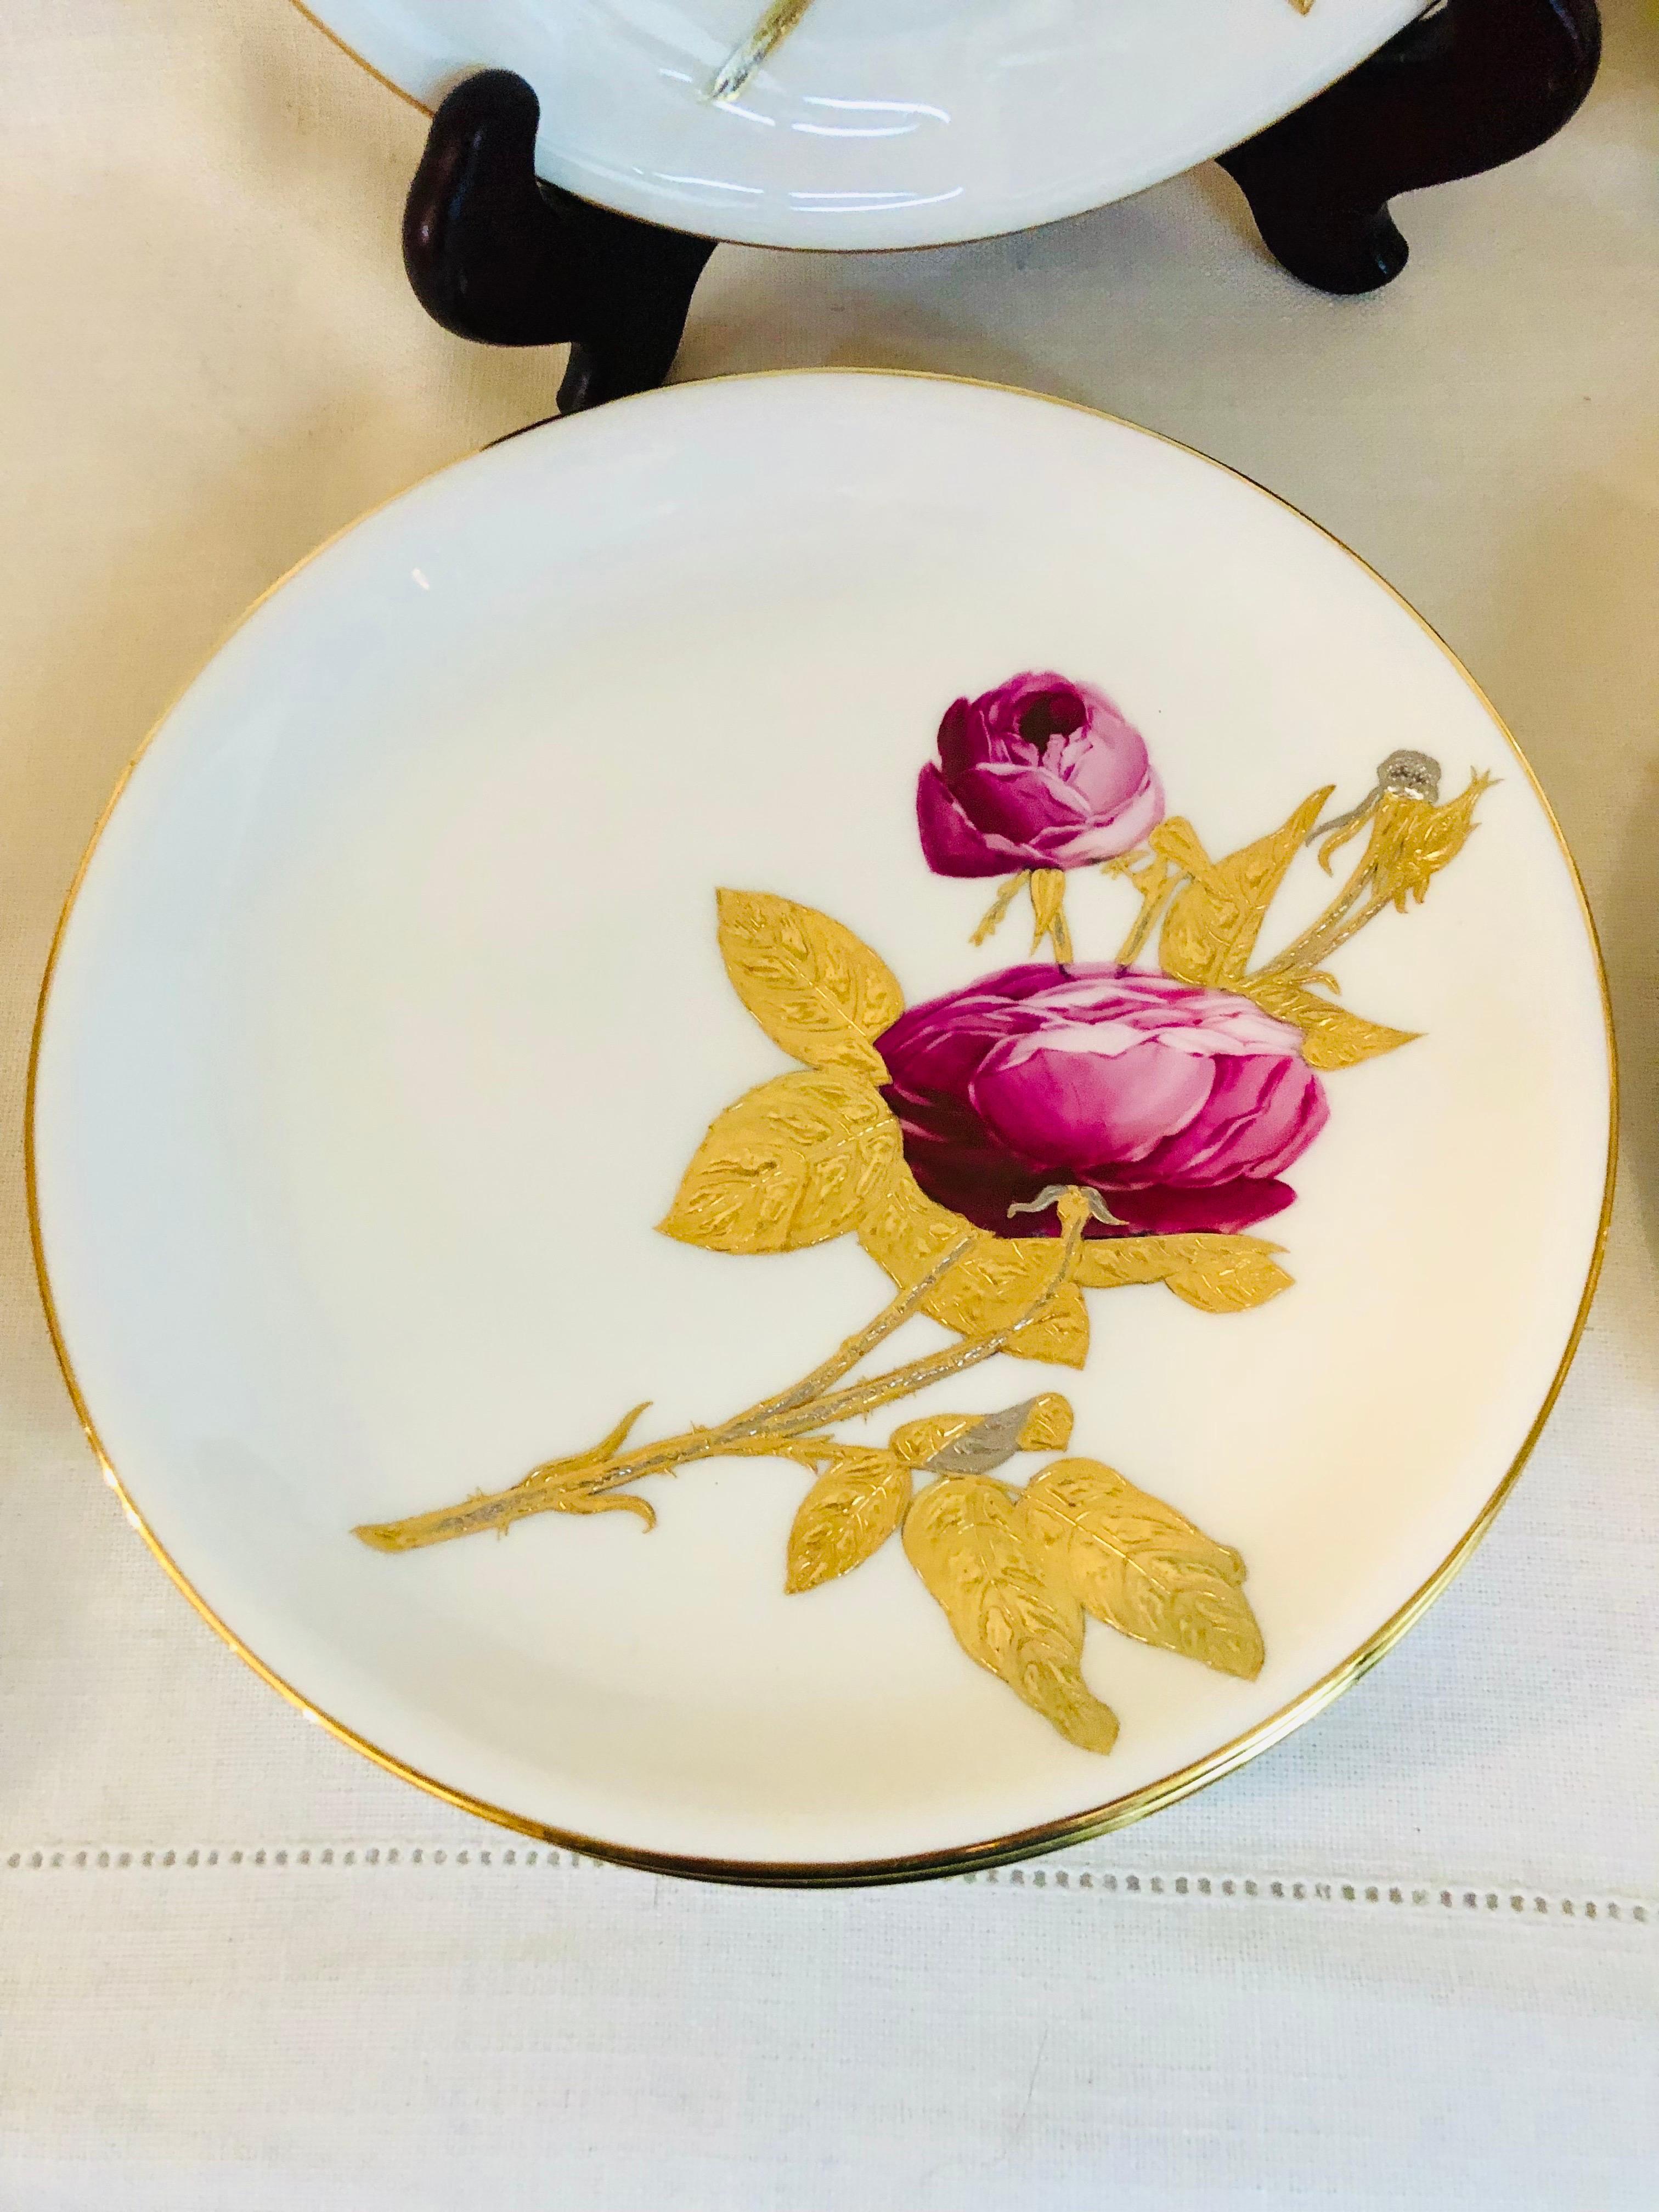 Gilt Minton Plates Each Painted With a Different Rose With Gold and Platinum Accents